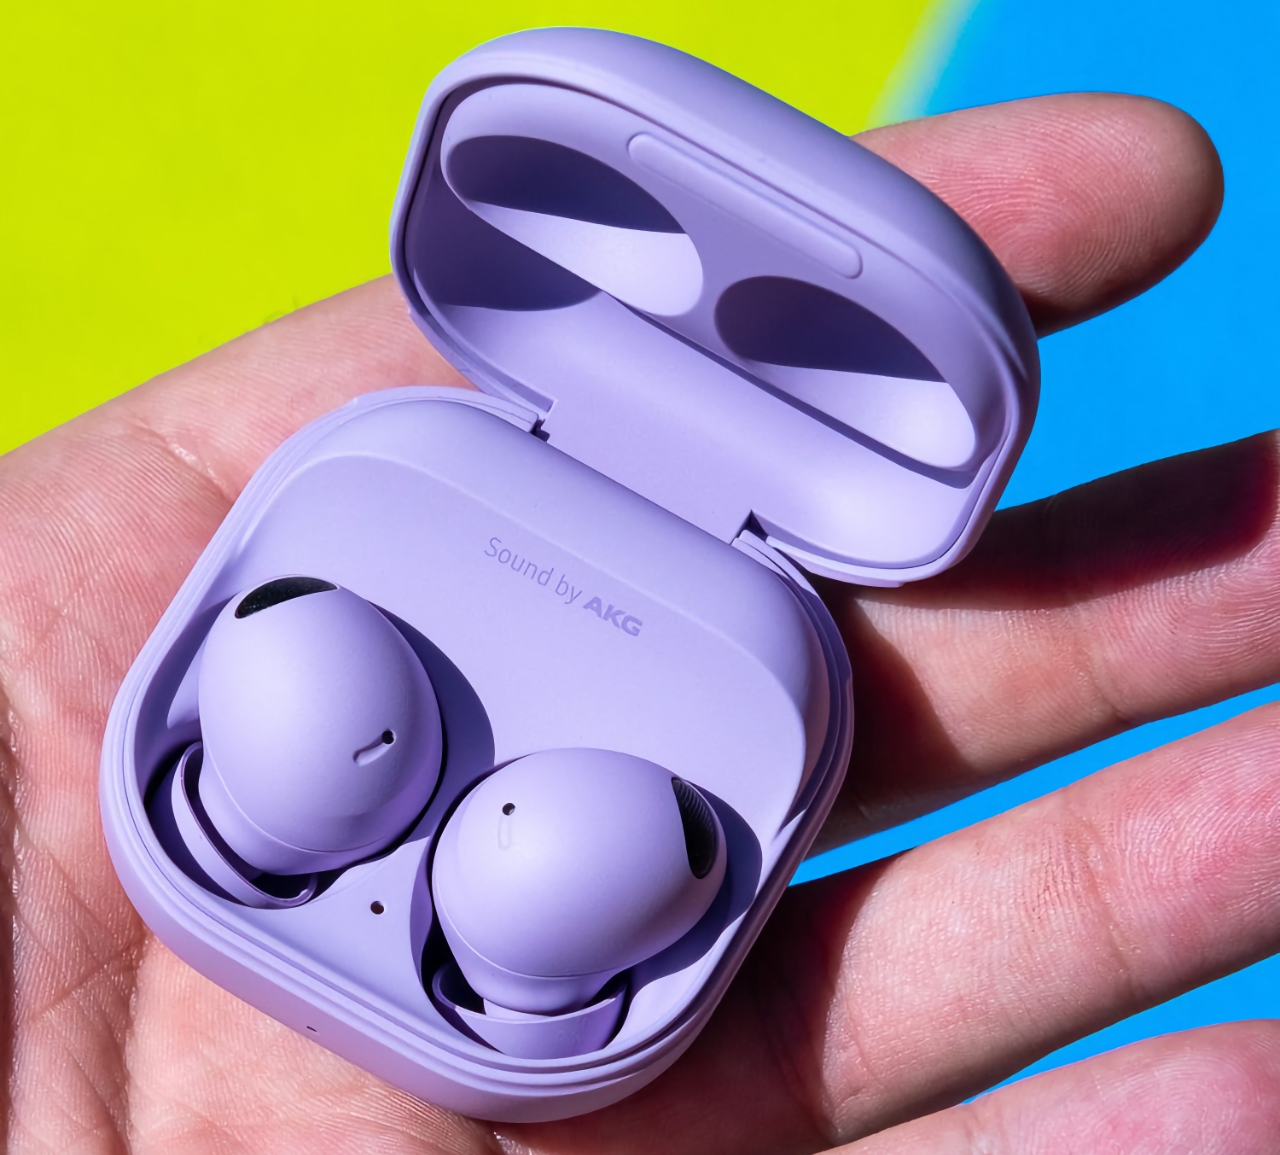 Samsung is working on new TWS Galaxy Buds with model number SM-R400N